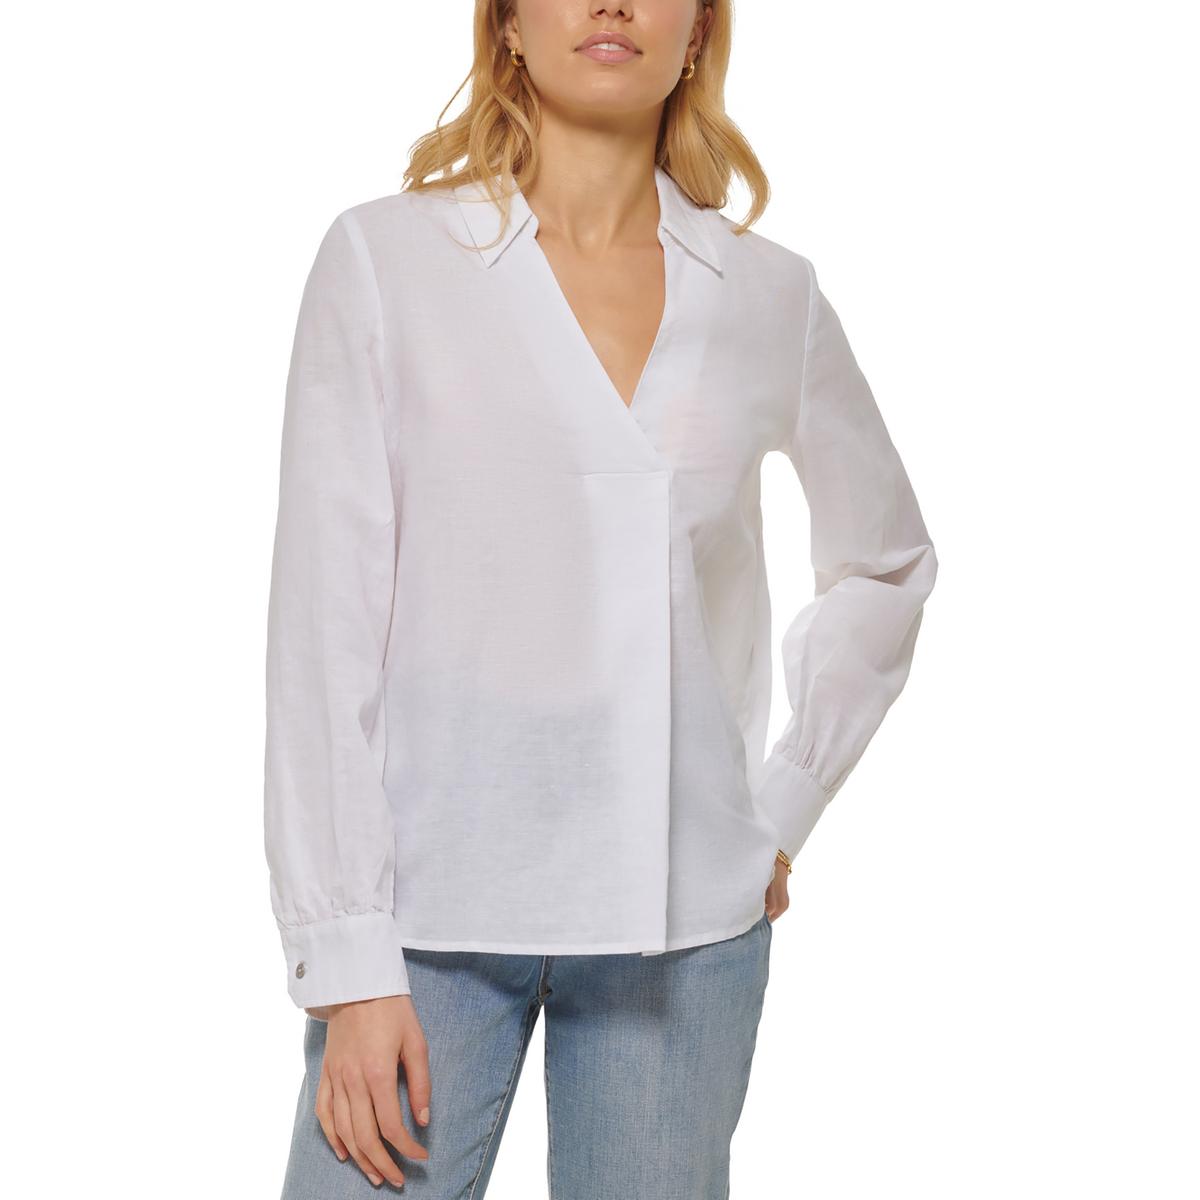 DKNY Womens Collared V-Neck Tunic Top